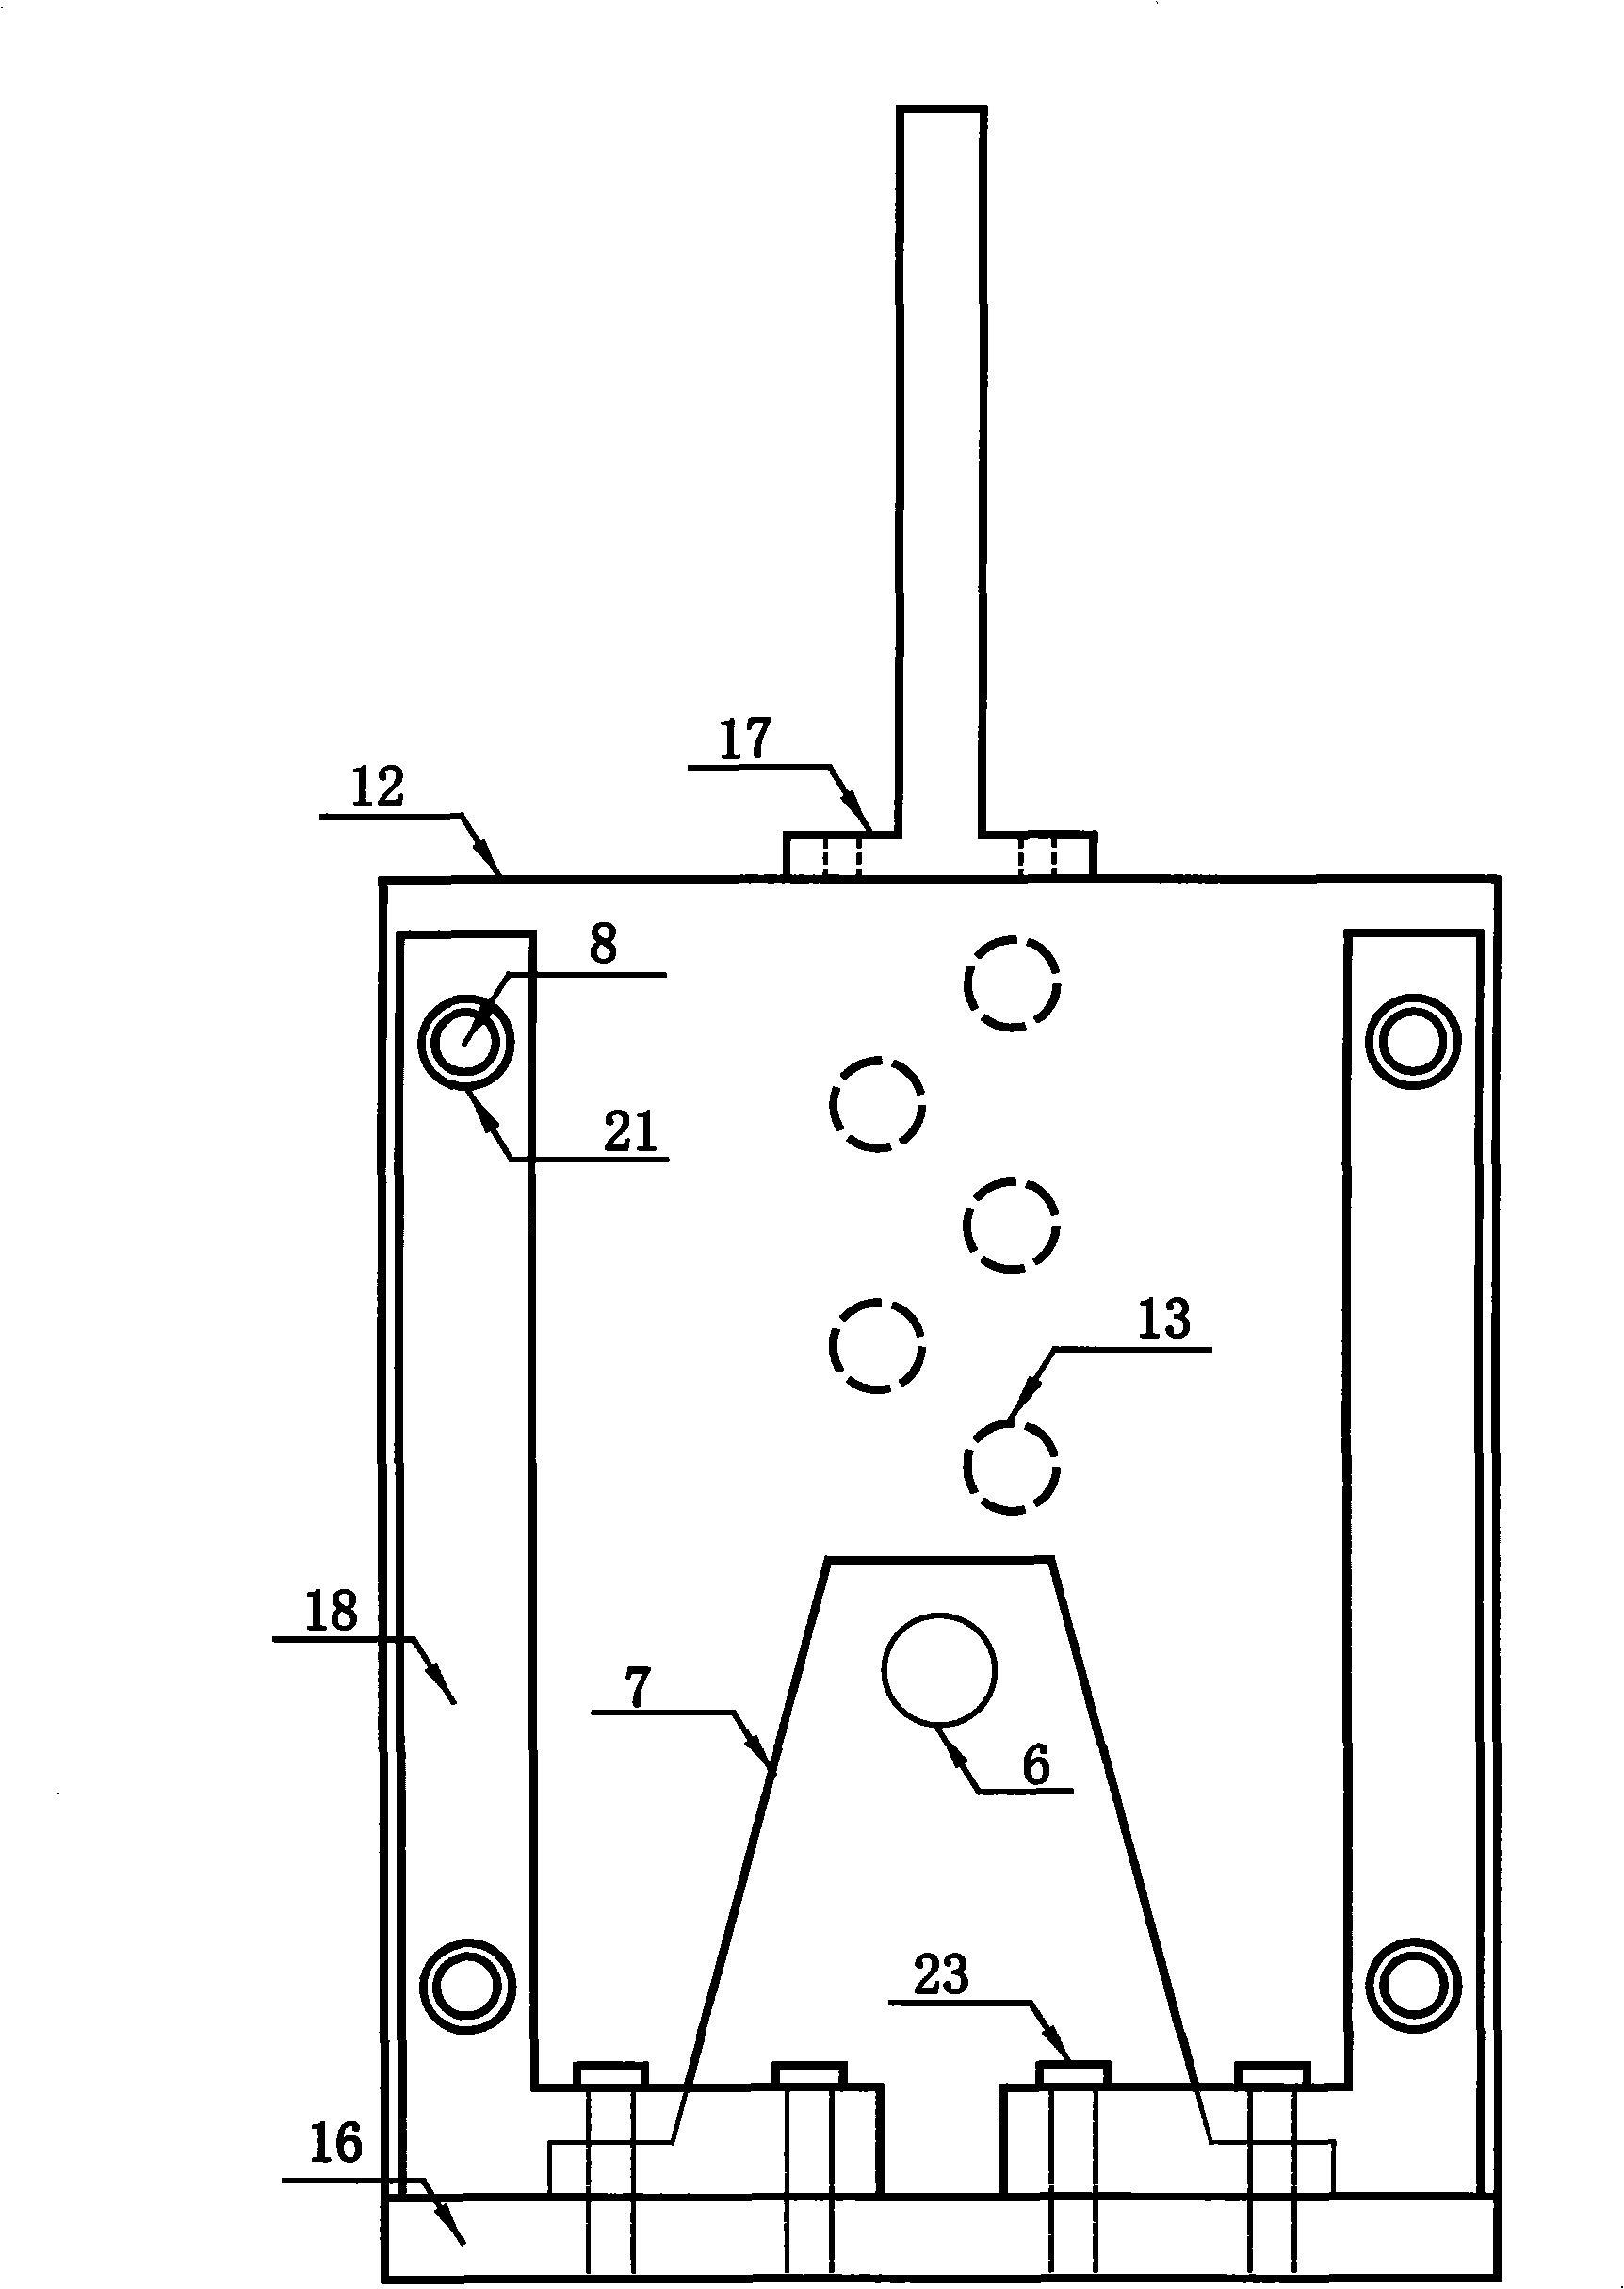 Centrifugal model retaining wall test device